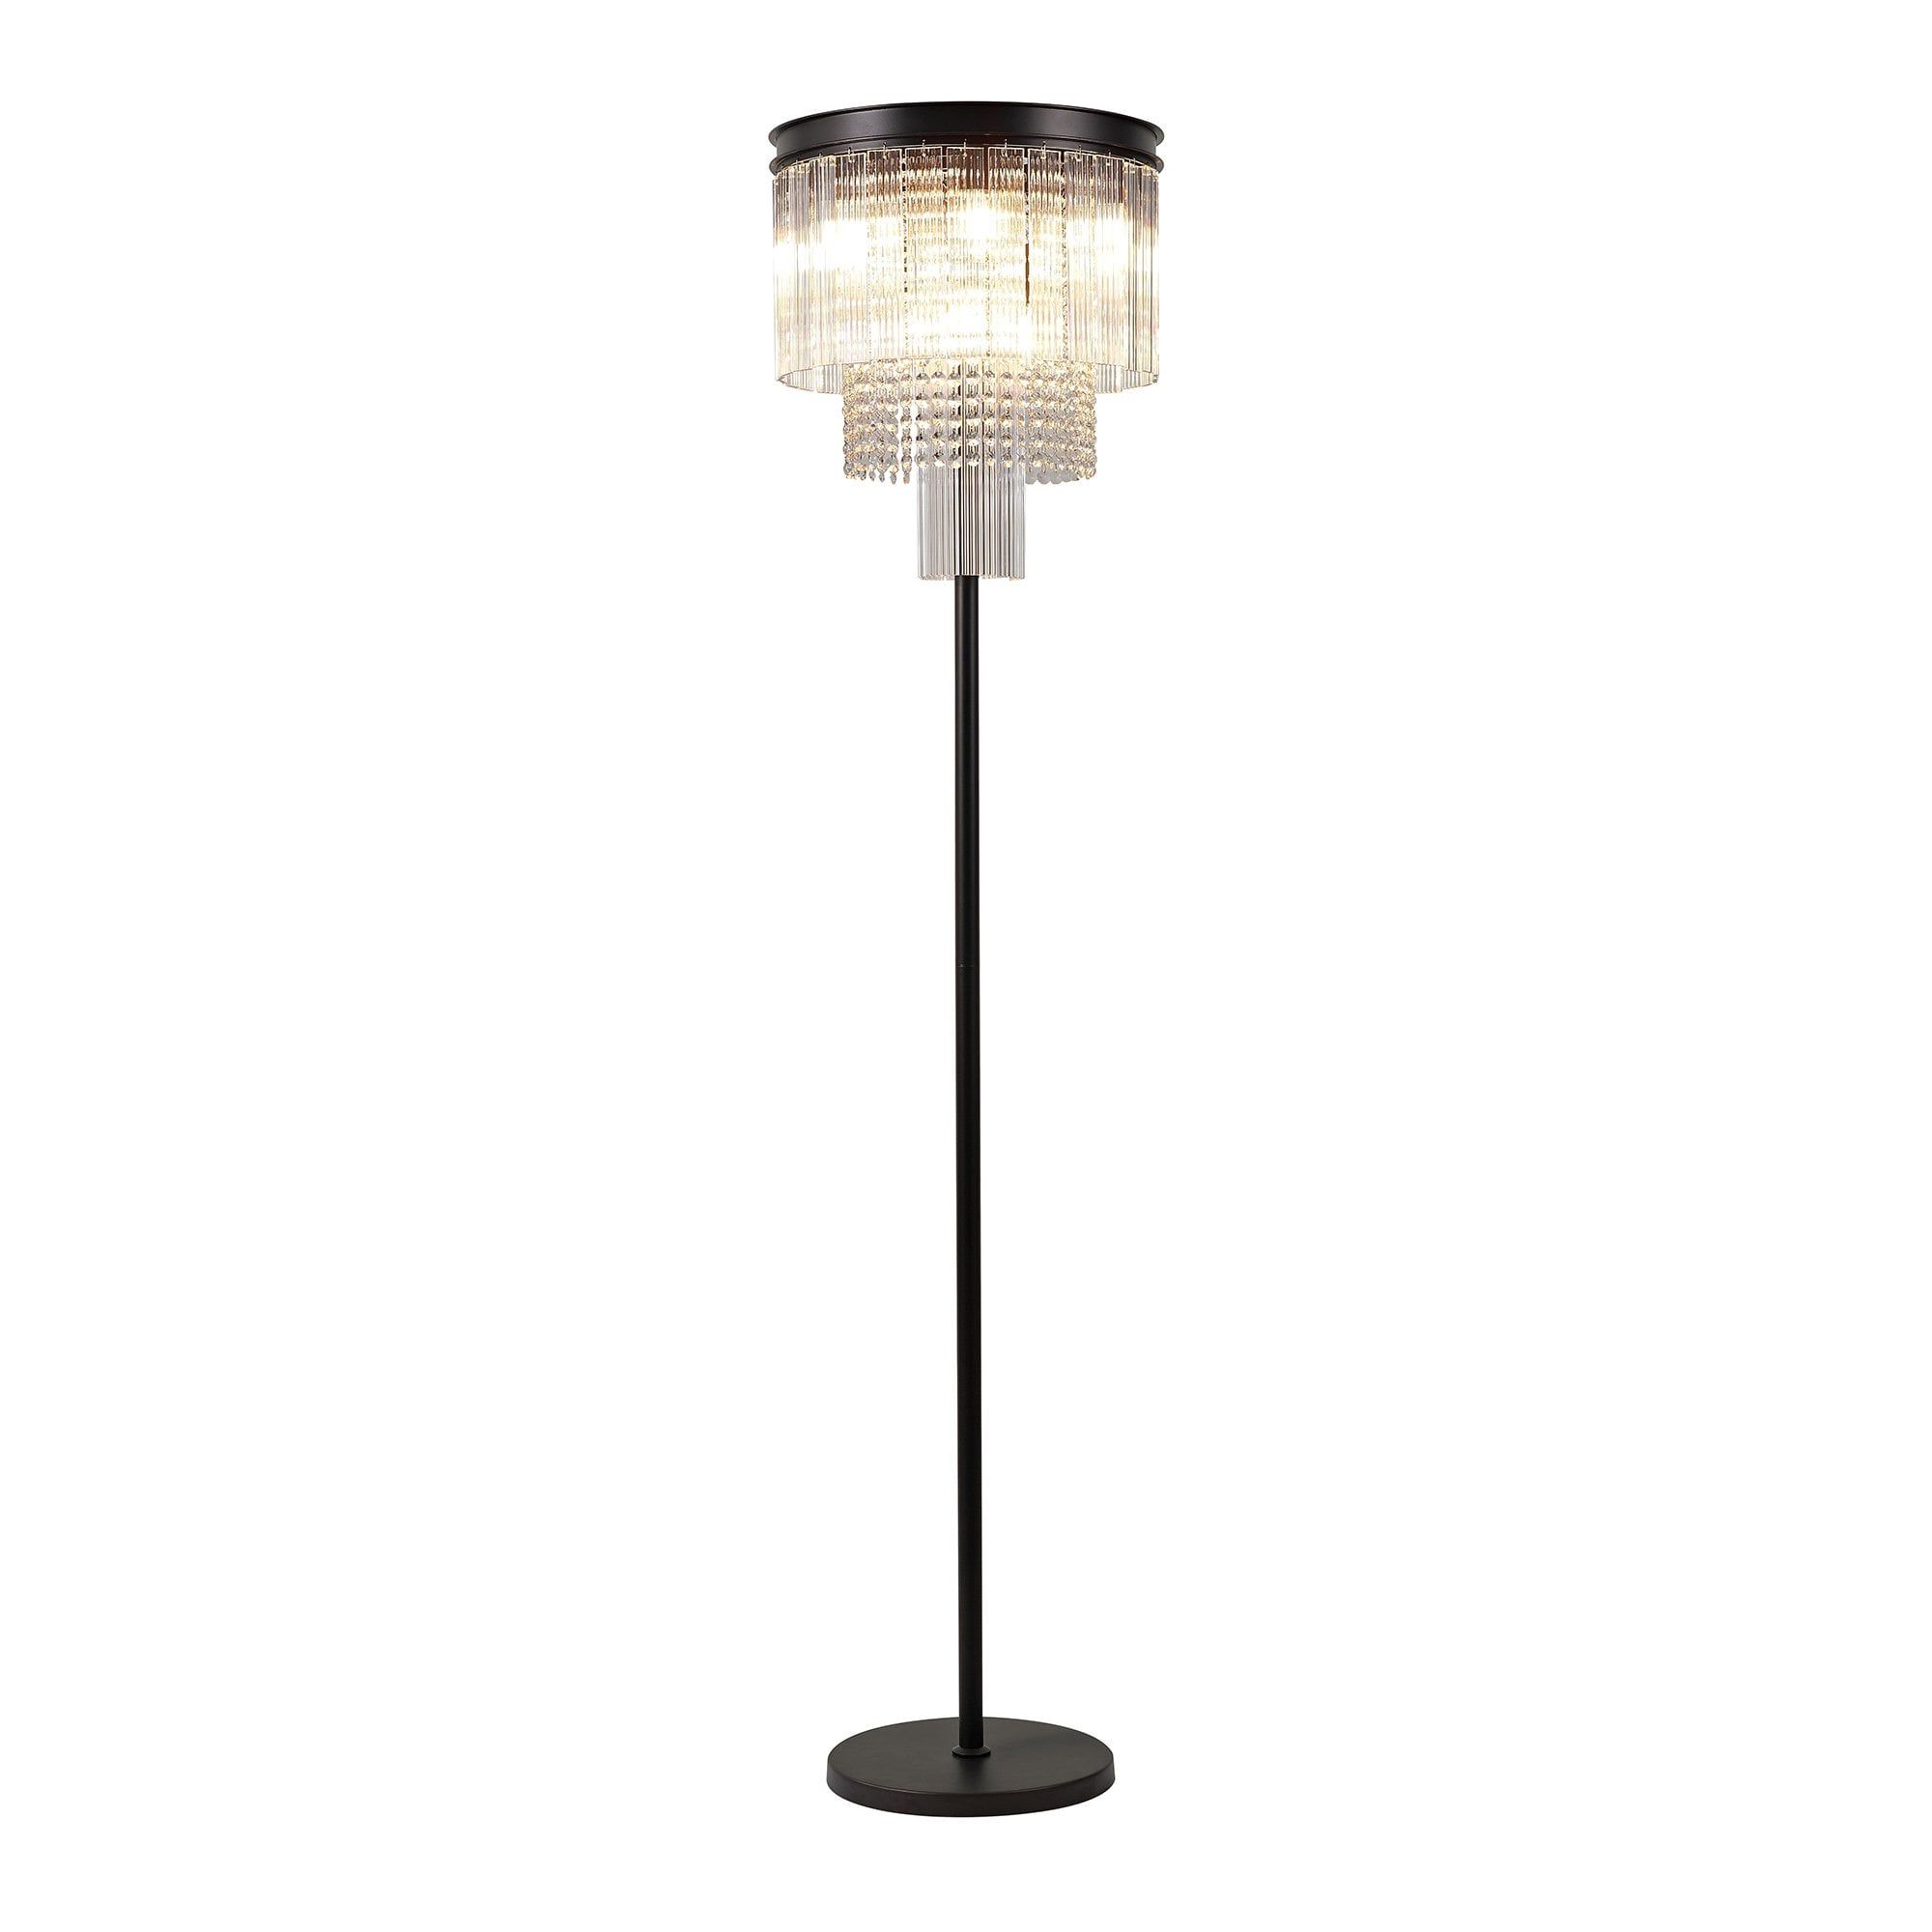 Lighting Company Uk In Well Known Chandelier Style Standing Lamps (View 7 of 10)